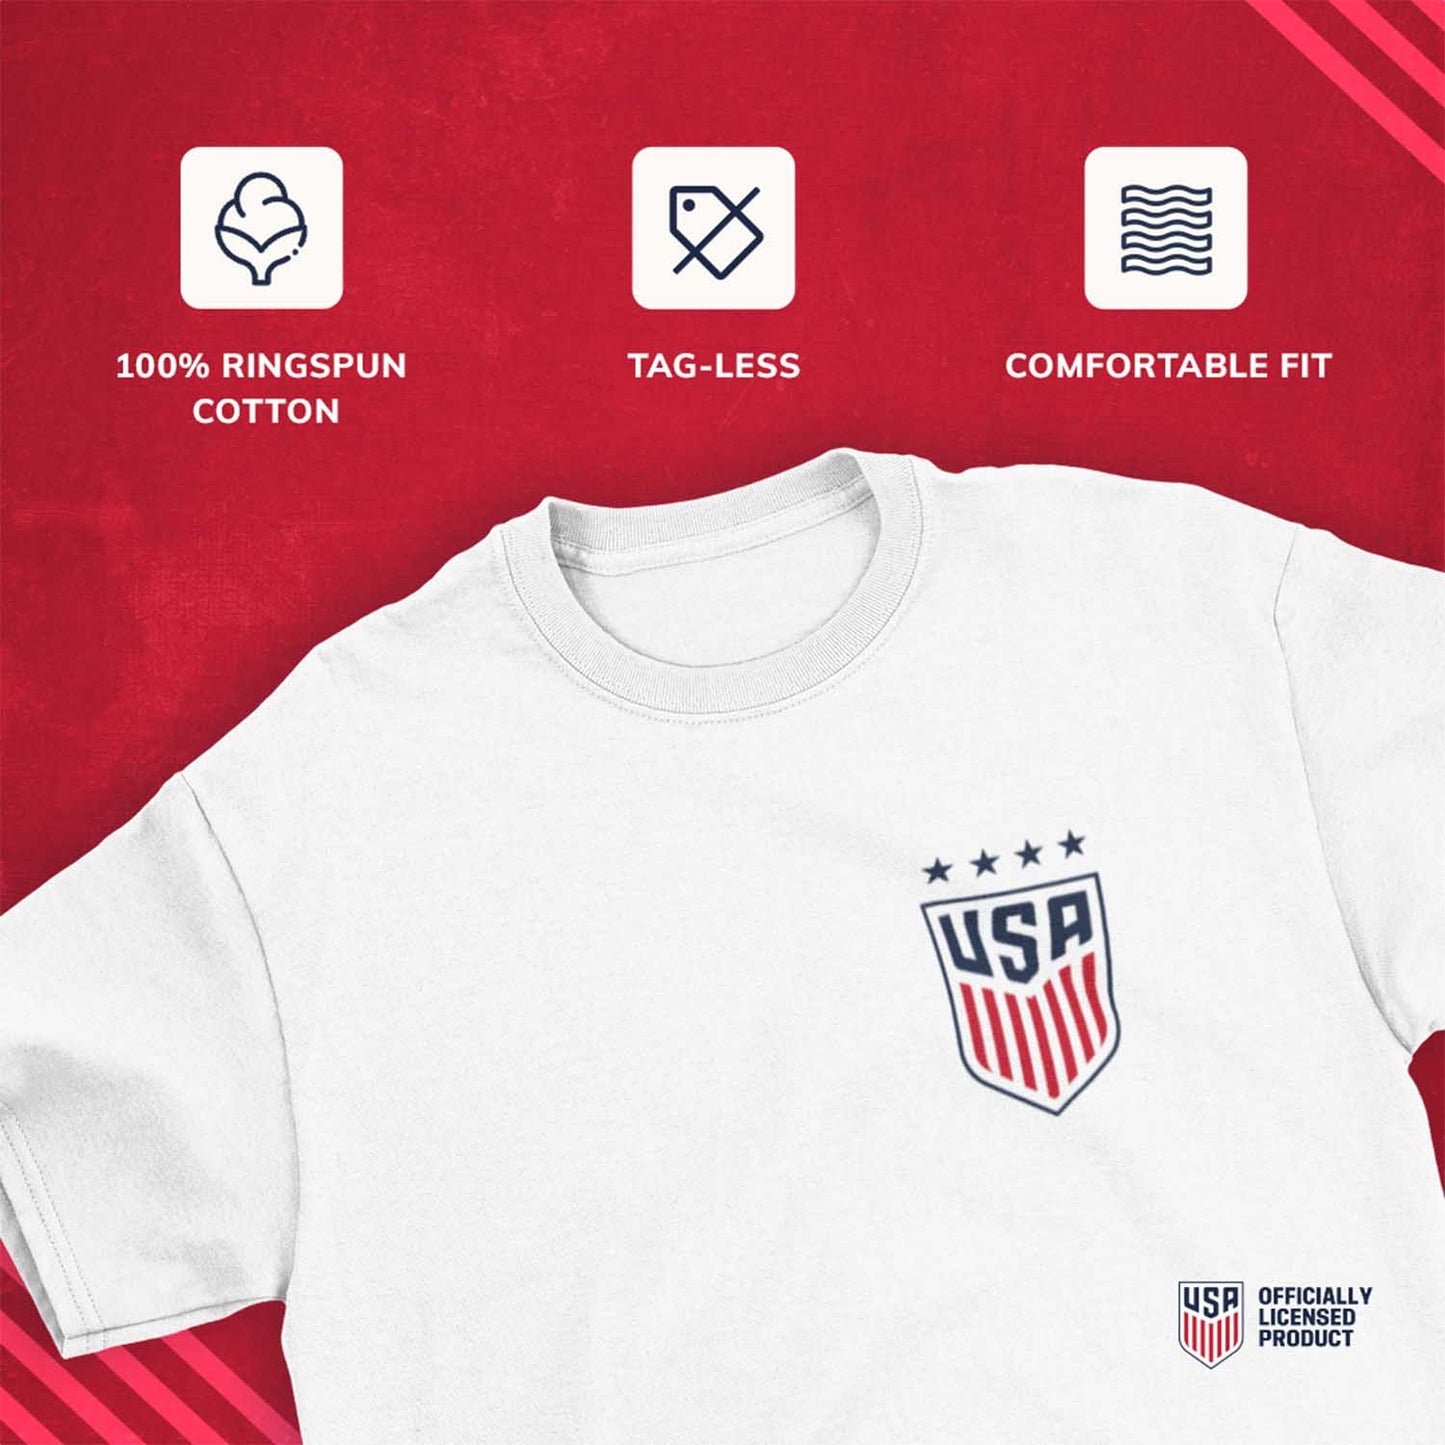 USA National Team The Victory Officially Licensed US Adult Women's National Soccer Team Megan Rapinoe Name & Number T-Shirt - White #15